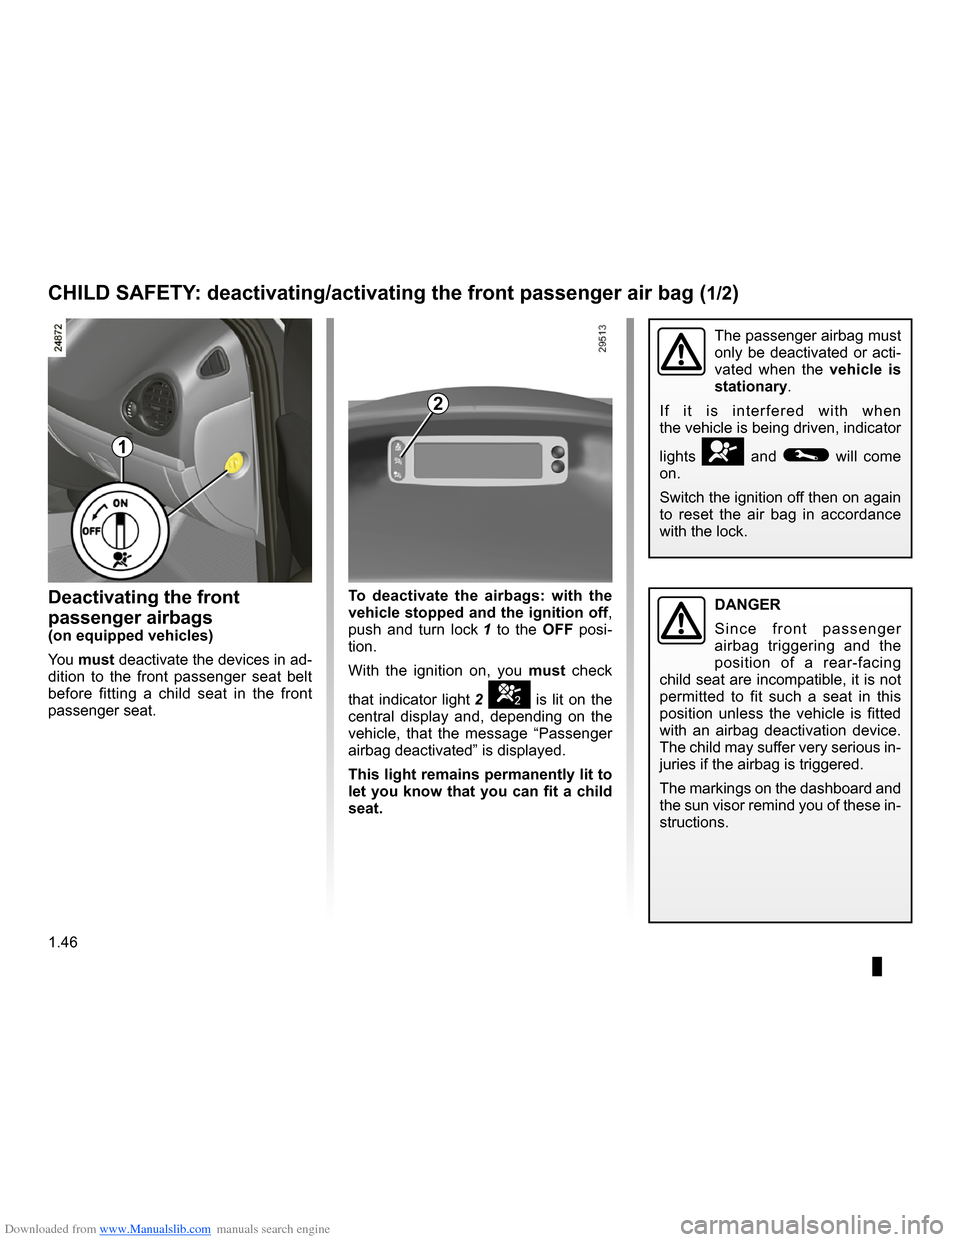 RENAULT CLIO 2009 X85 / 3.G User Guide Downloaded from www.Manualslib.com manuals search engine 
air bagdeactivating the front passenger air bags ........(current page)front passenger air bag deactivation  .....................(current pag